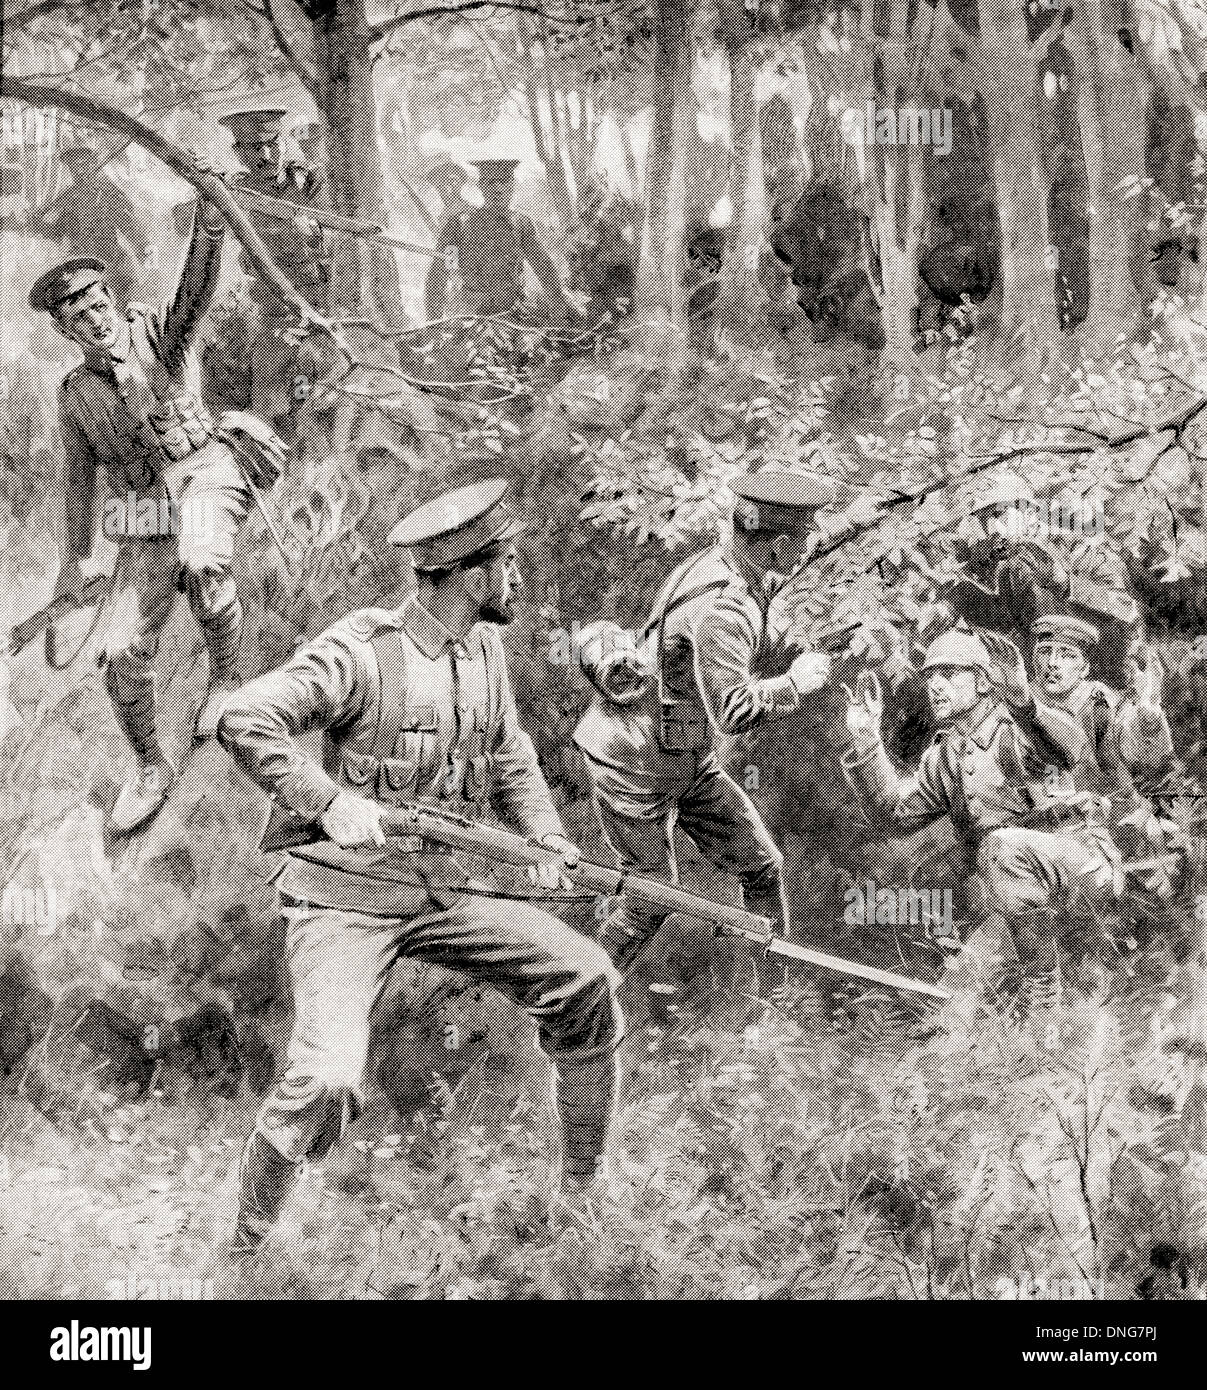 Hungry German soldiers surrender to an inferior British force during WWI. From The War Illustrated Album Deluxe, published 1915. Stock Photo